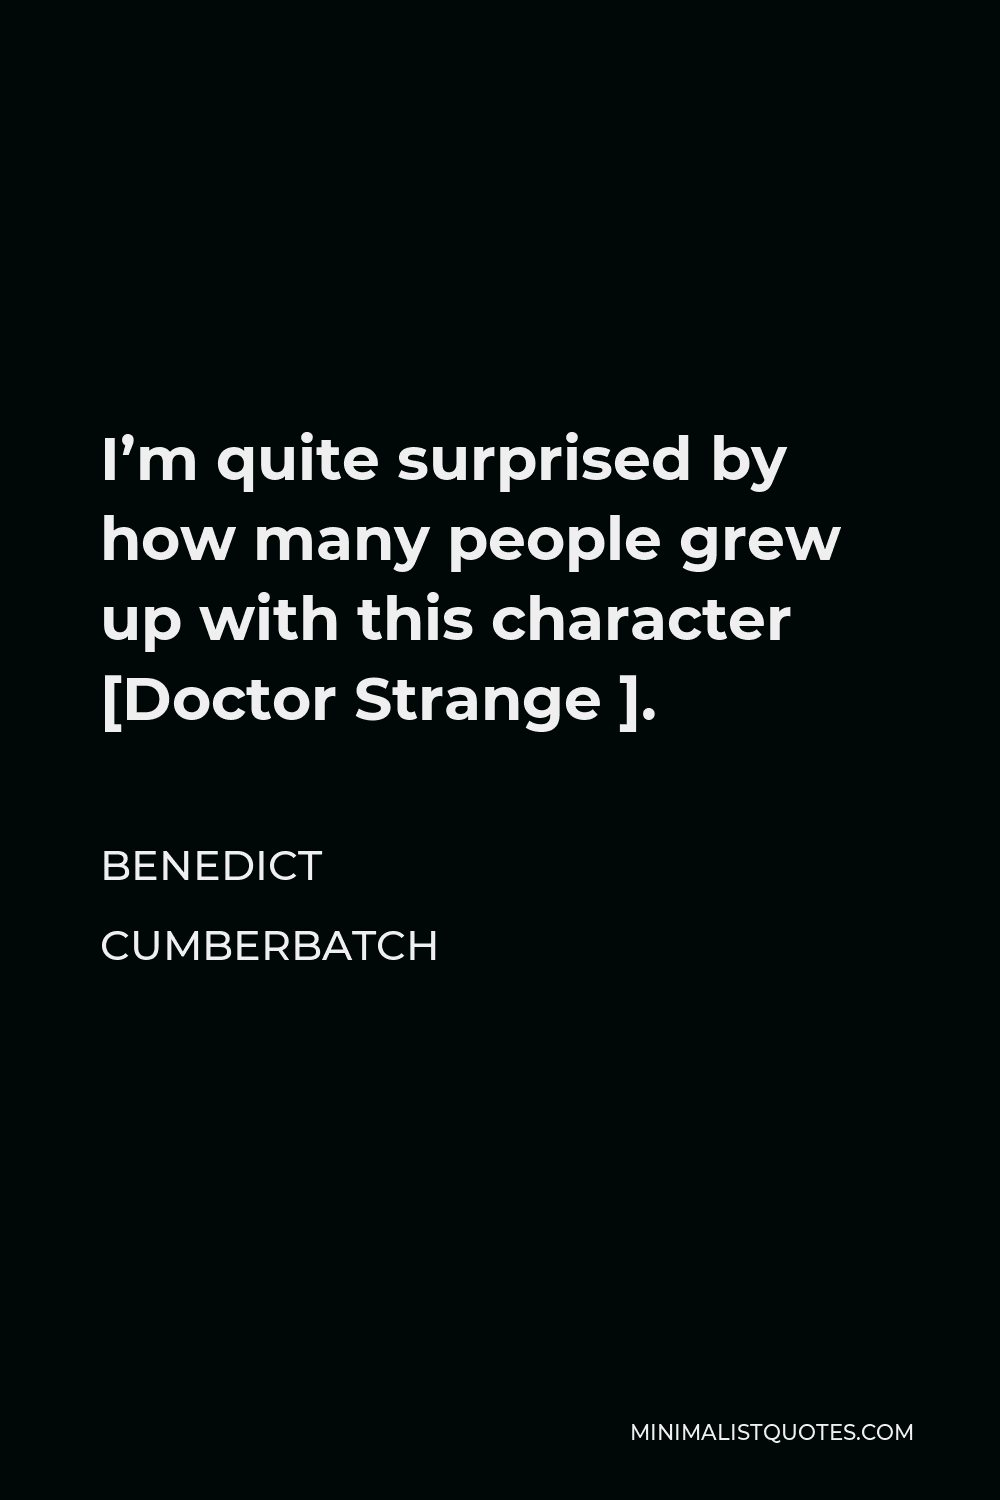 Benedict Cumberbatch Quote - I’m quite surprised by how many people grew up with this character [Doctor Strange ].